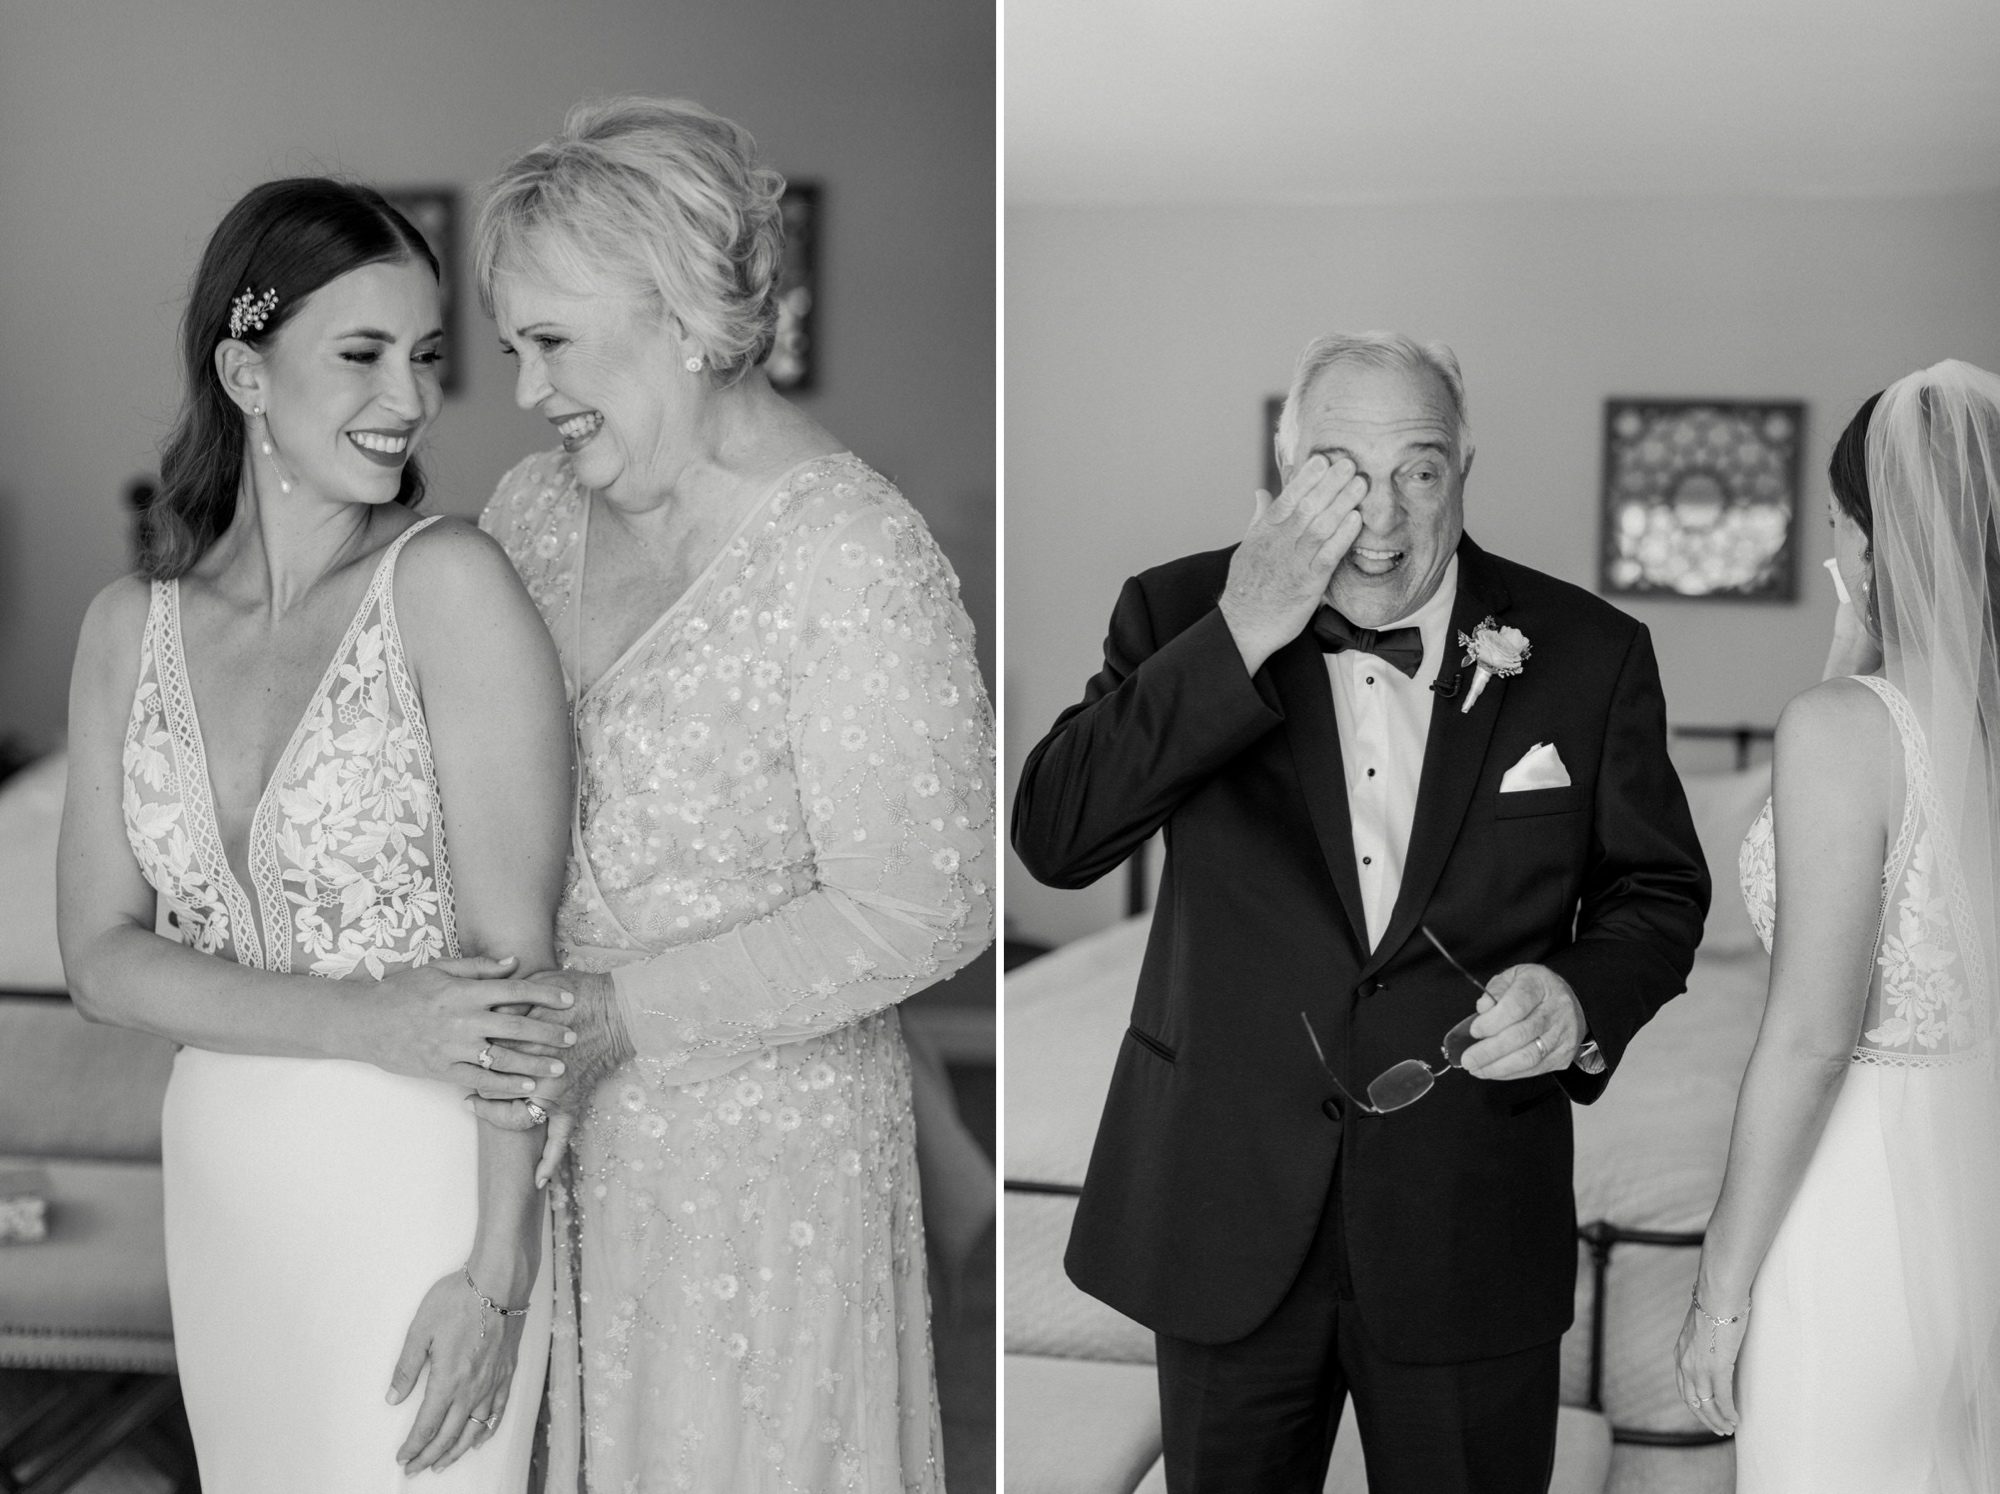 emotional moment of bride with her mother and bride with her father as she's getting ready at the White Barn Edna Valley photographed by san luis obispo wedding photographers jessica sofranko